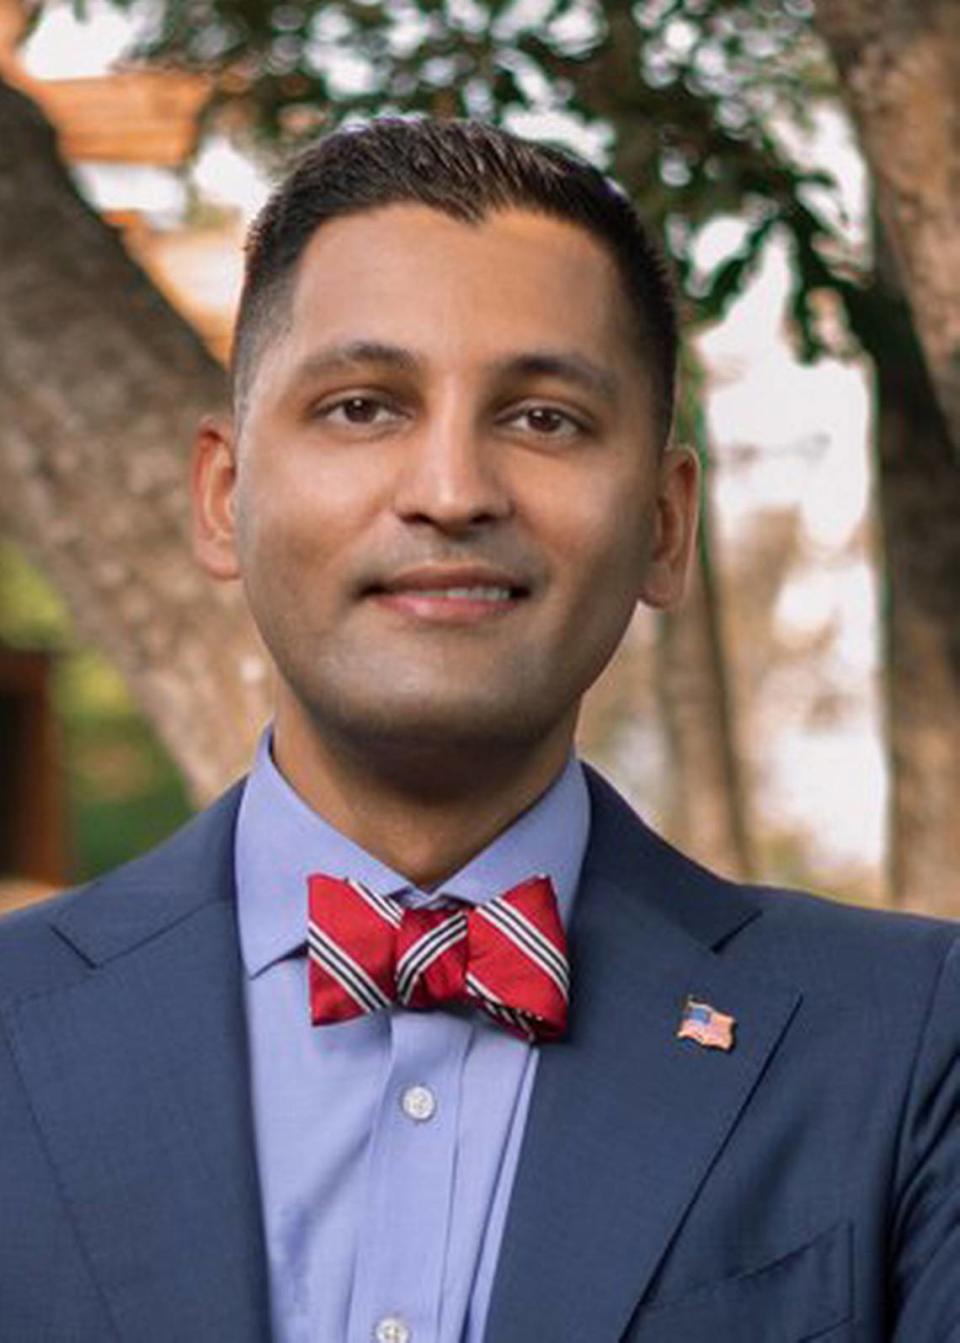 Tal Siddique is running as a Republican for the District 3 seat on the Manatee County Commission in 2024.